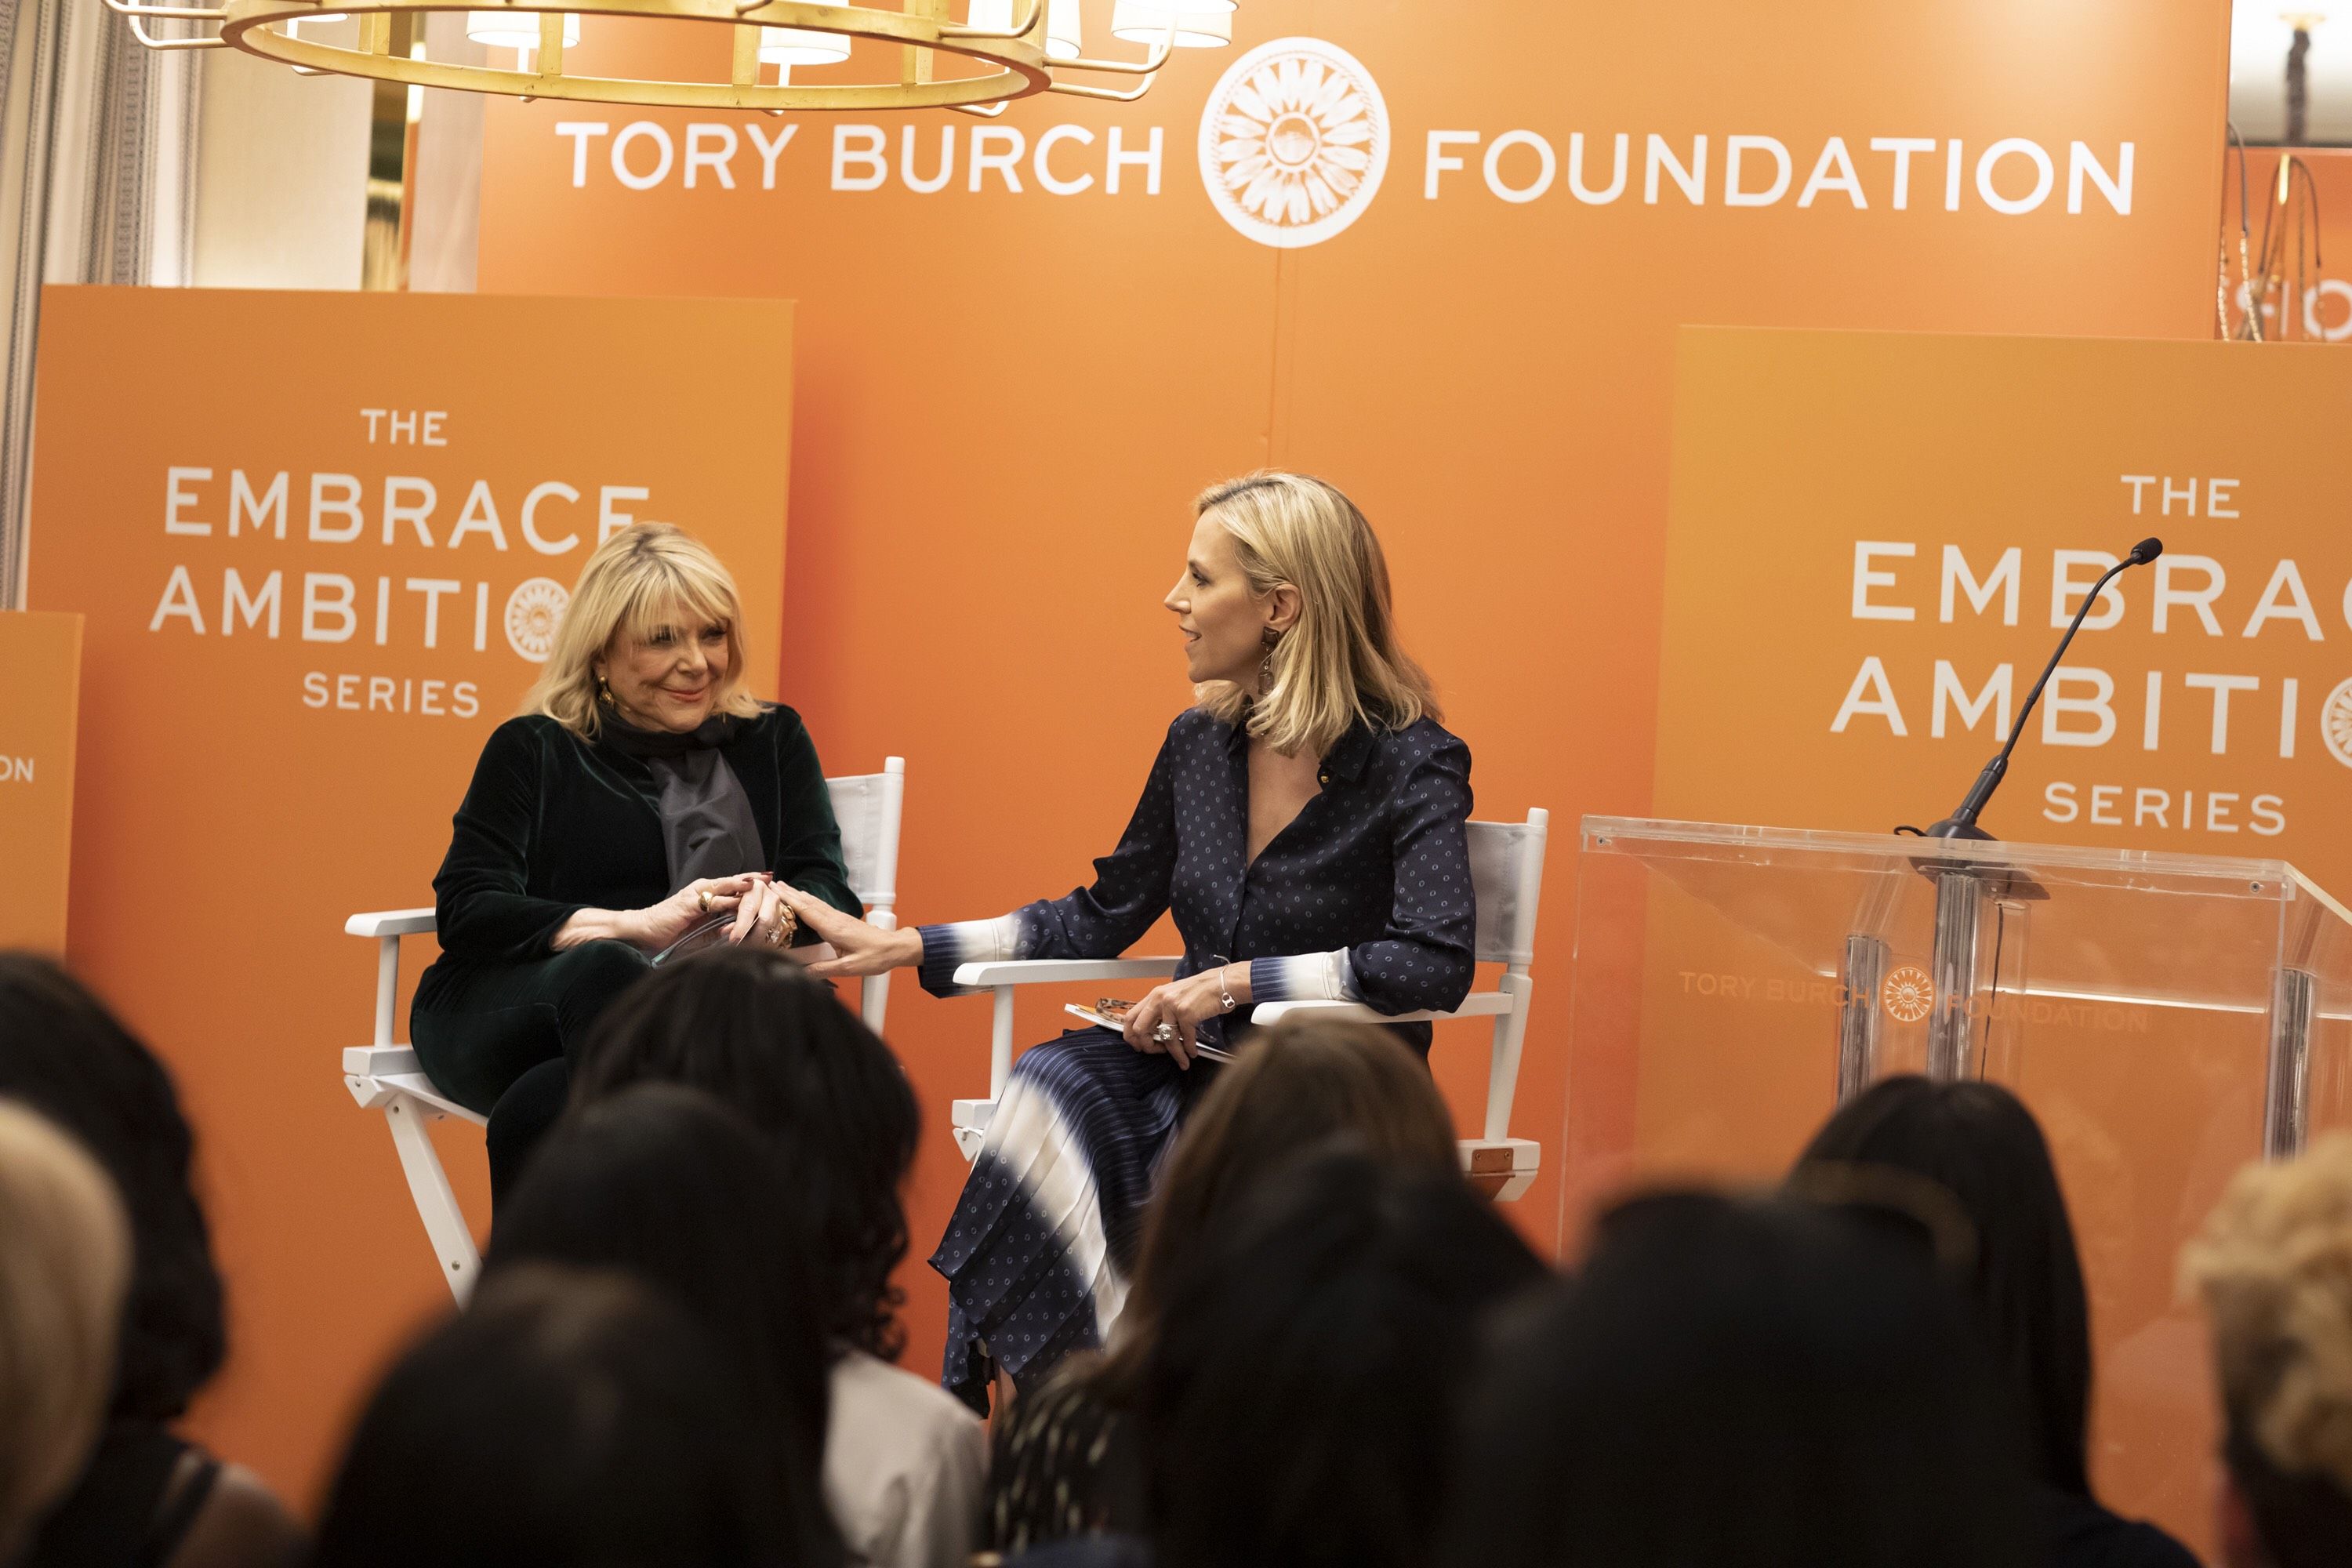 Tory Burch on Forbes Billionaires List